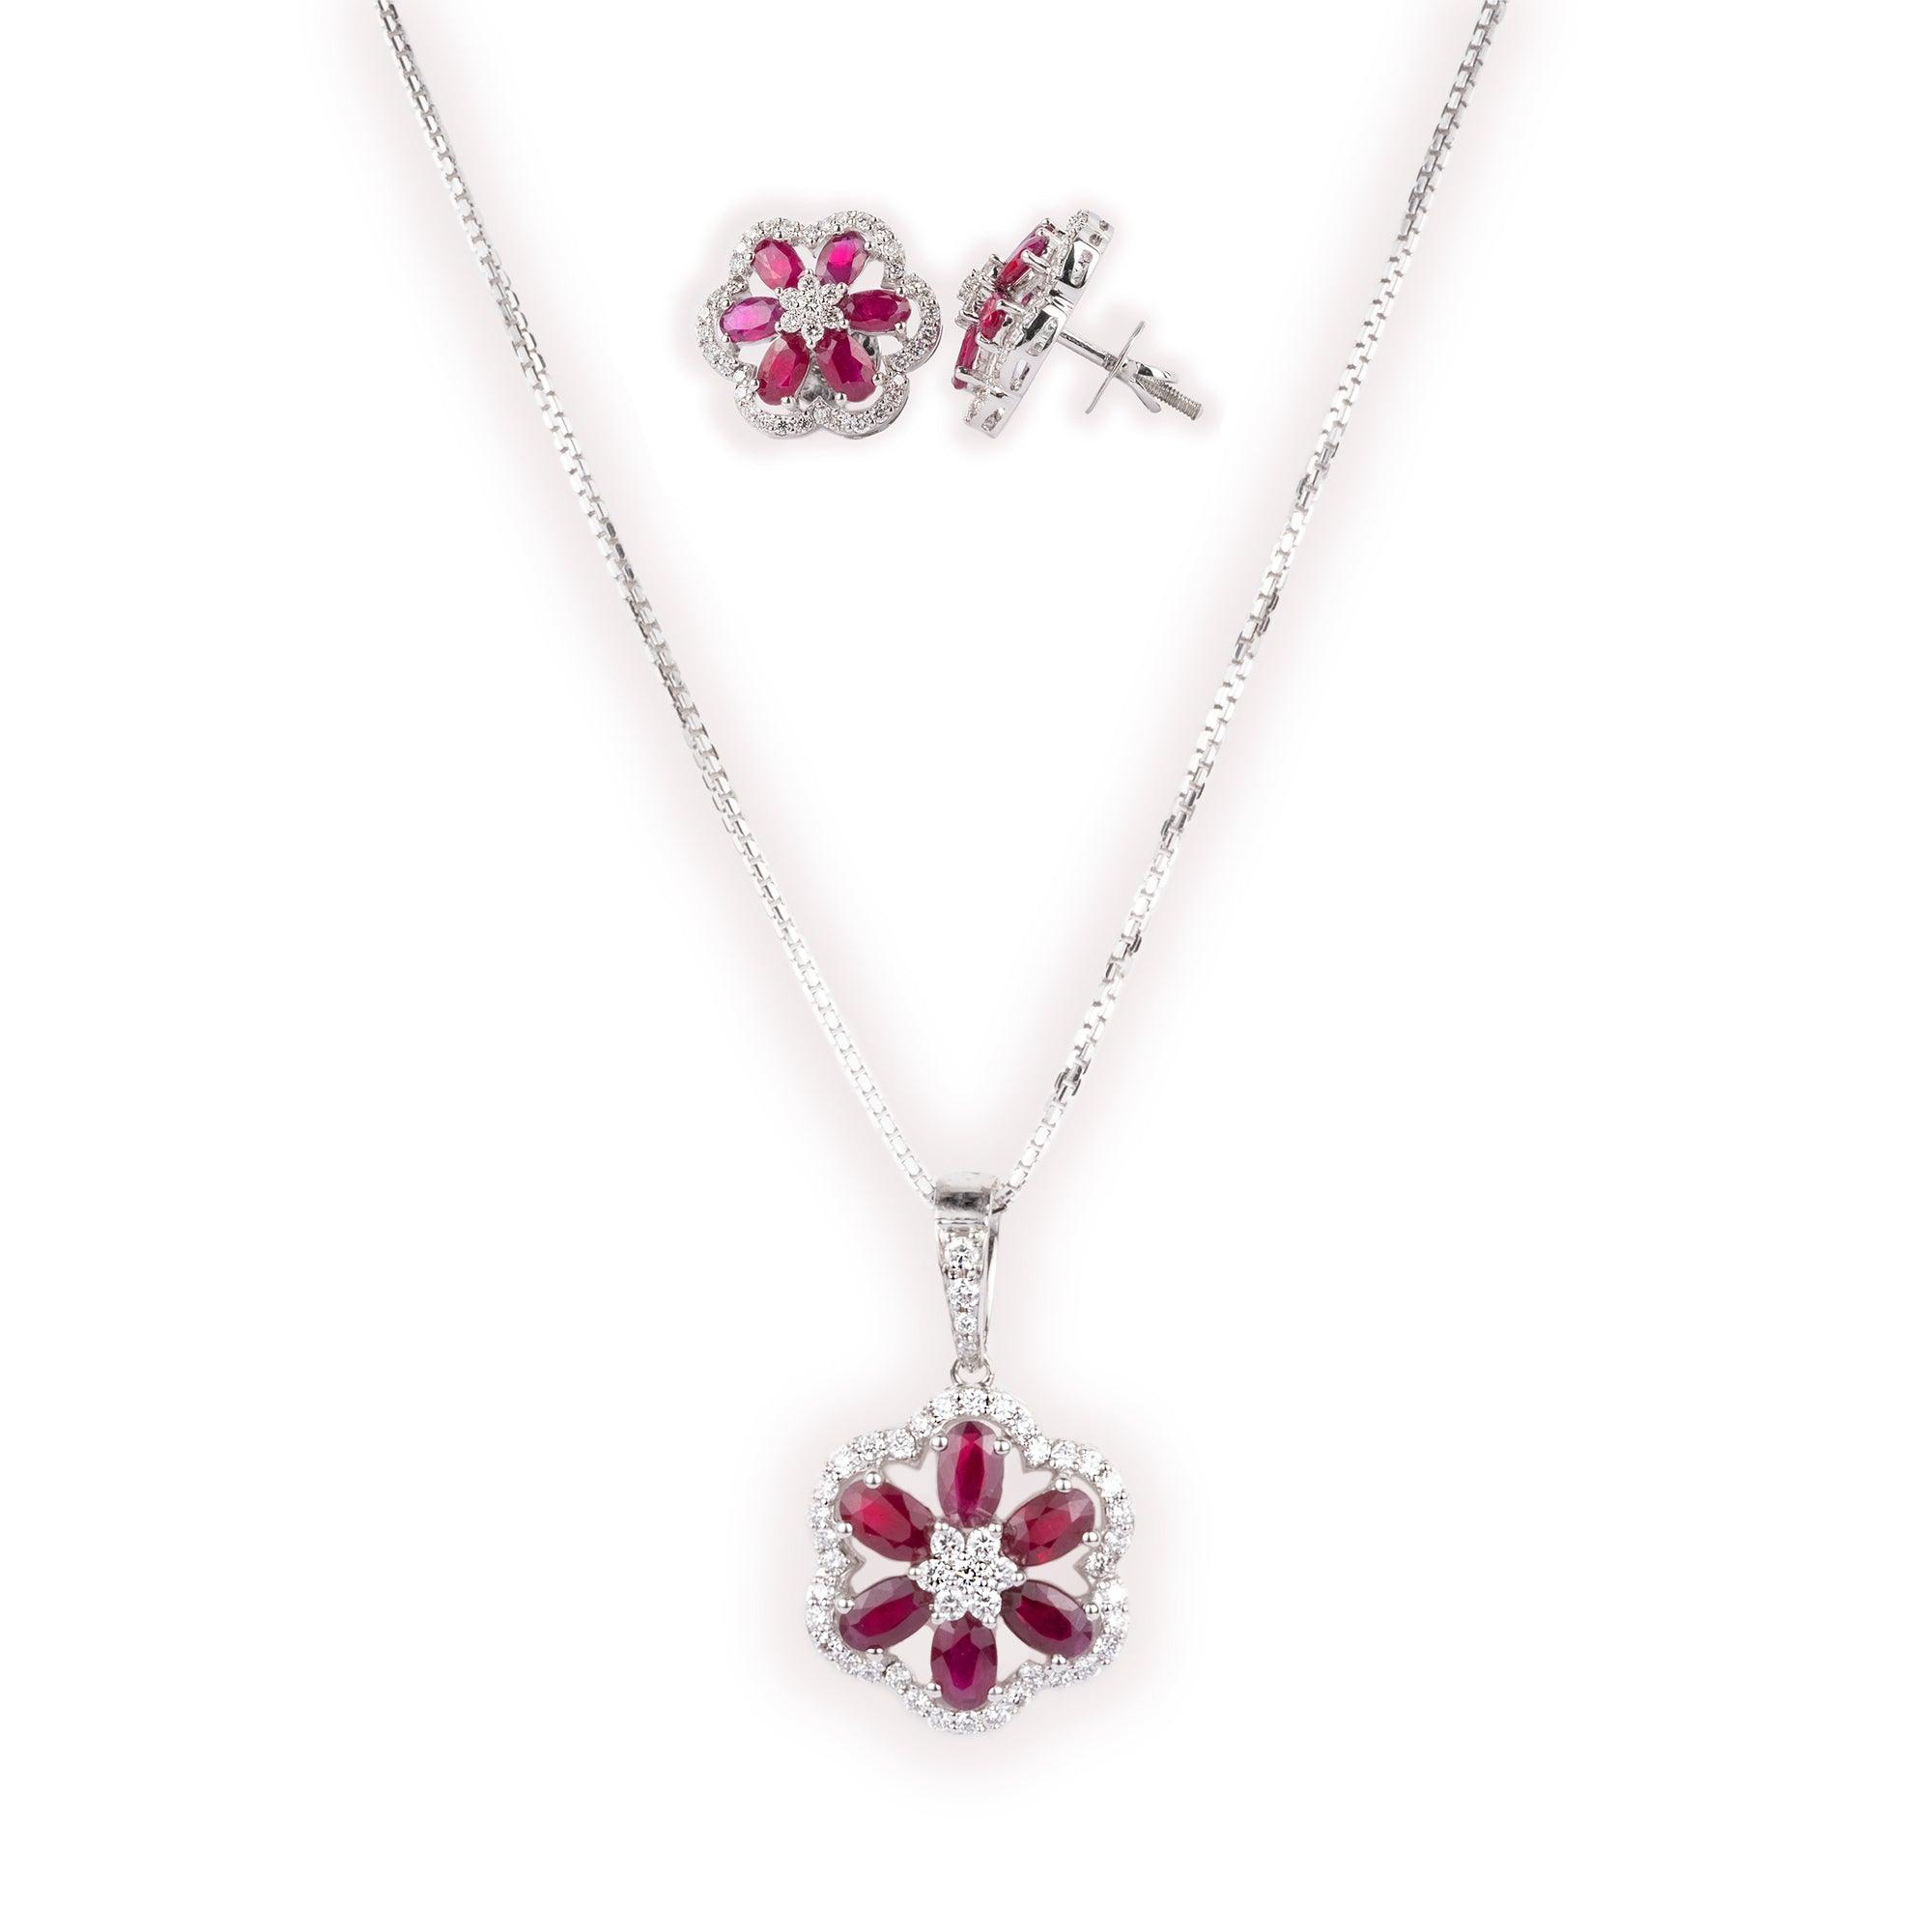 18ct White Gold Diamond & Ruby Chain, Pendant and Earrings Set CH-09548-WW-420 MCS2606 MCS2607 - Minar Jewellers